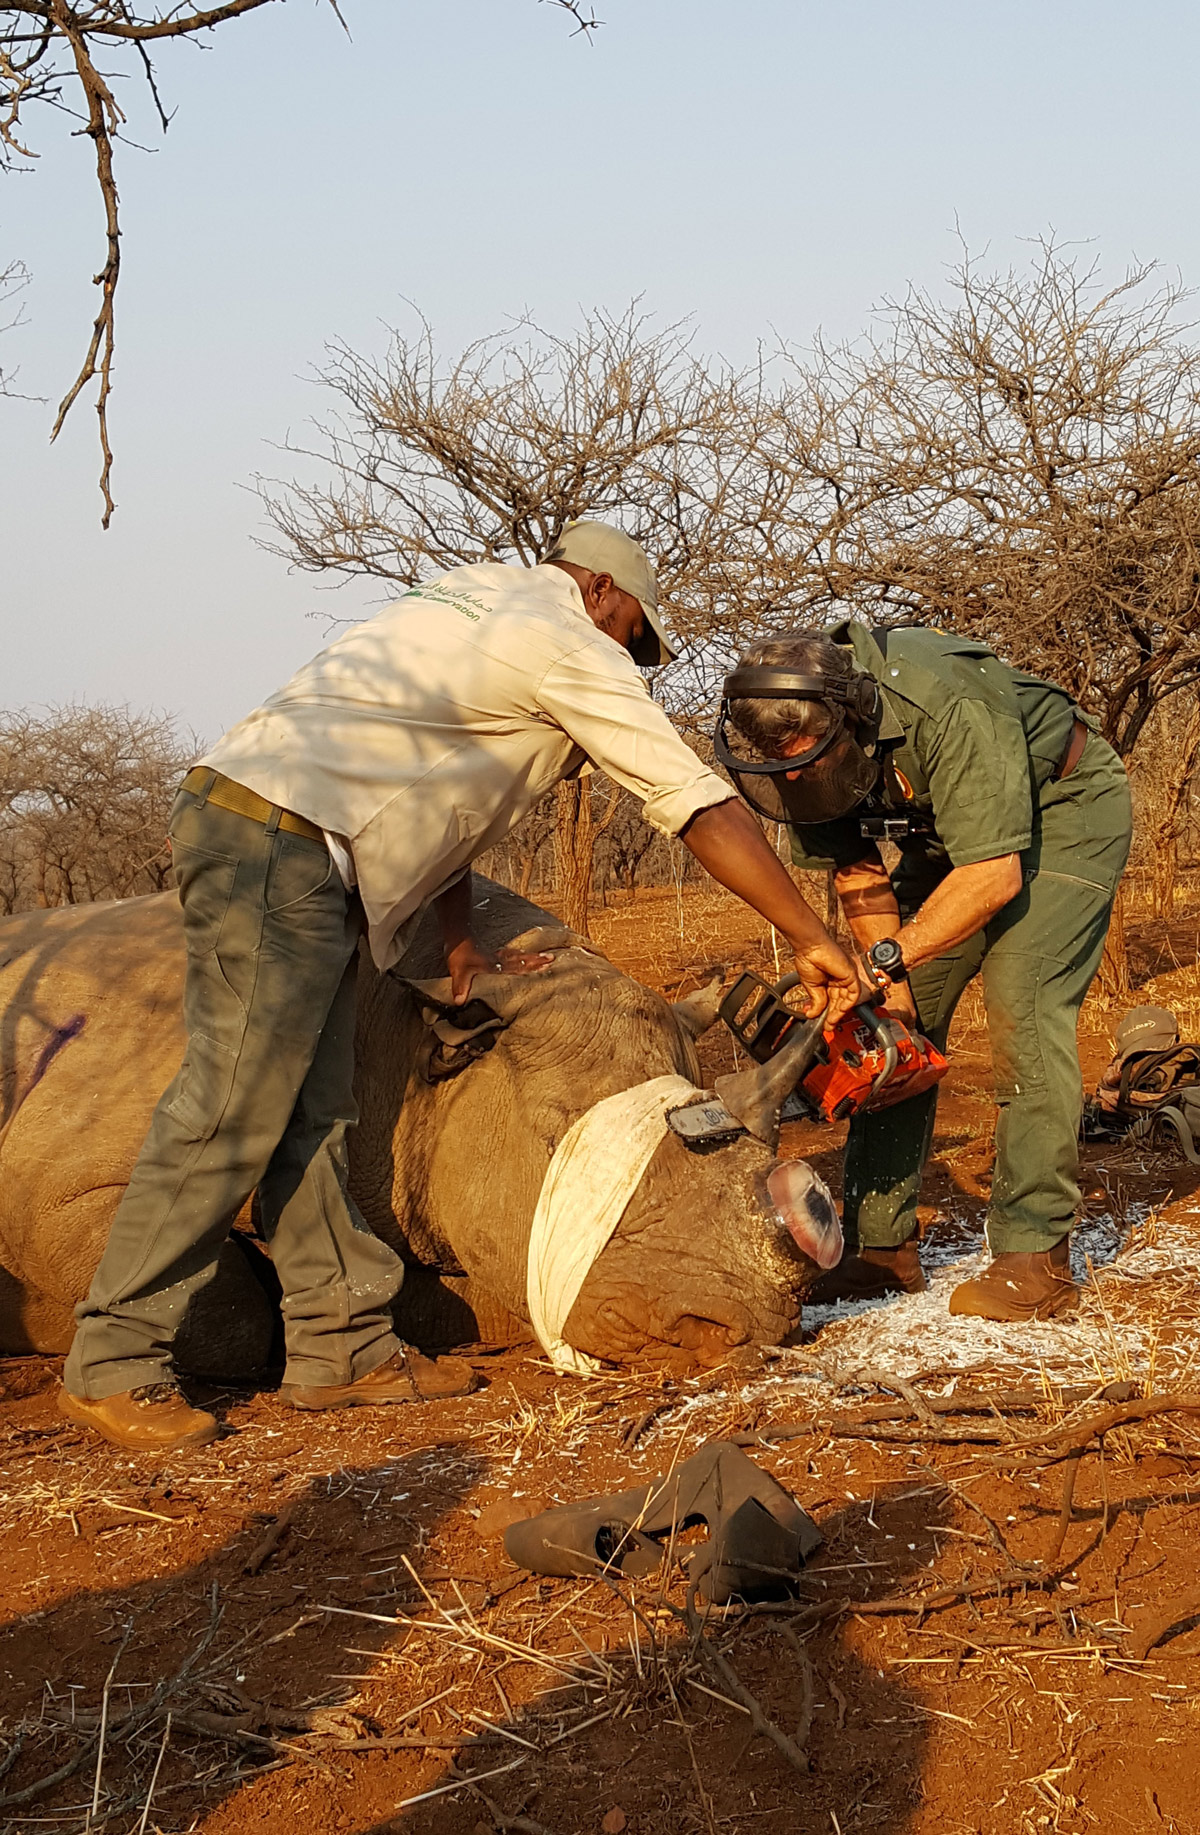 removing a horn from a rhino